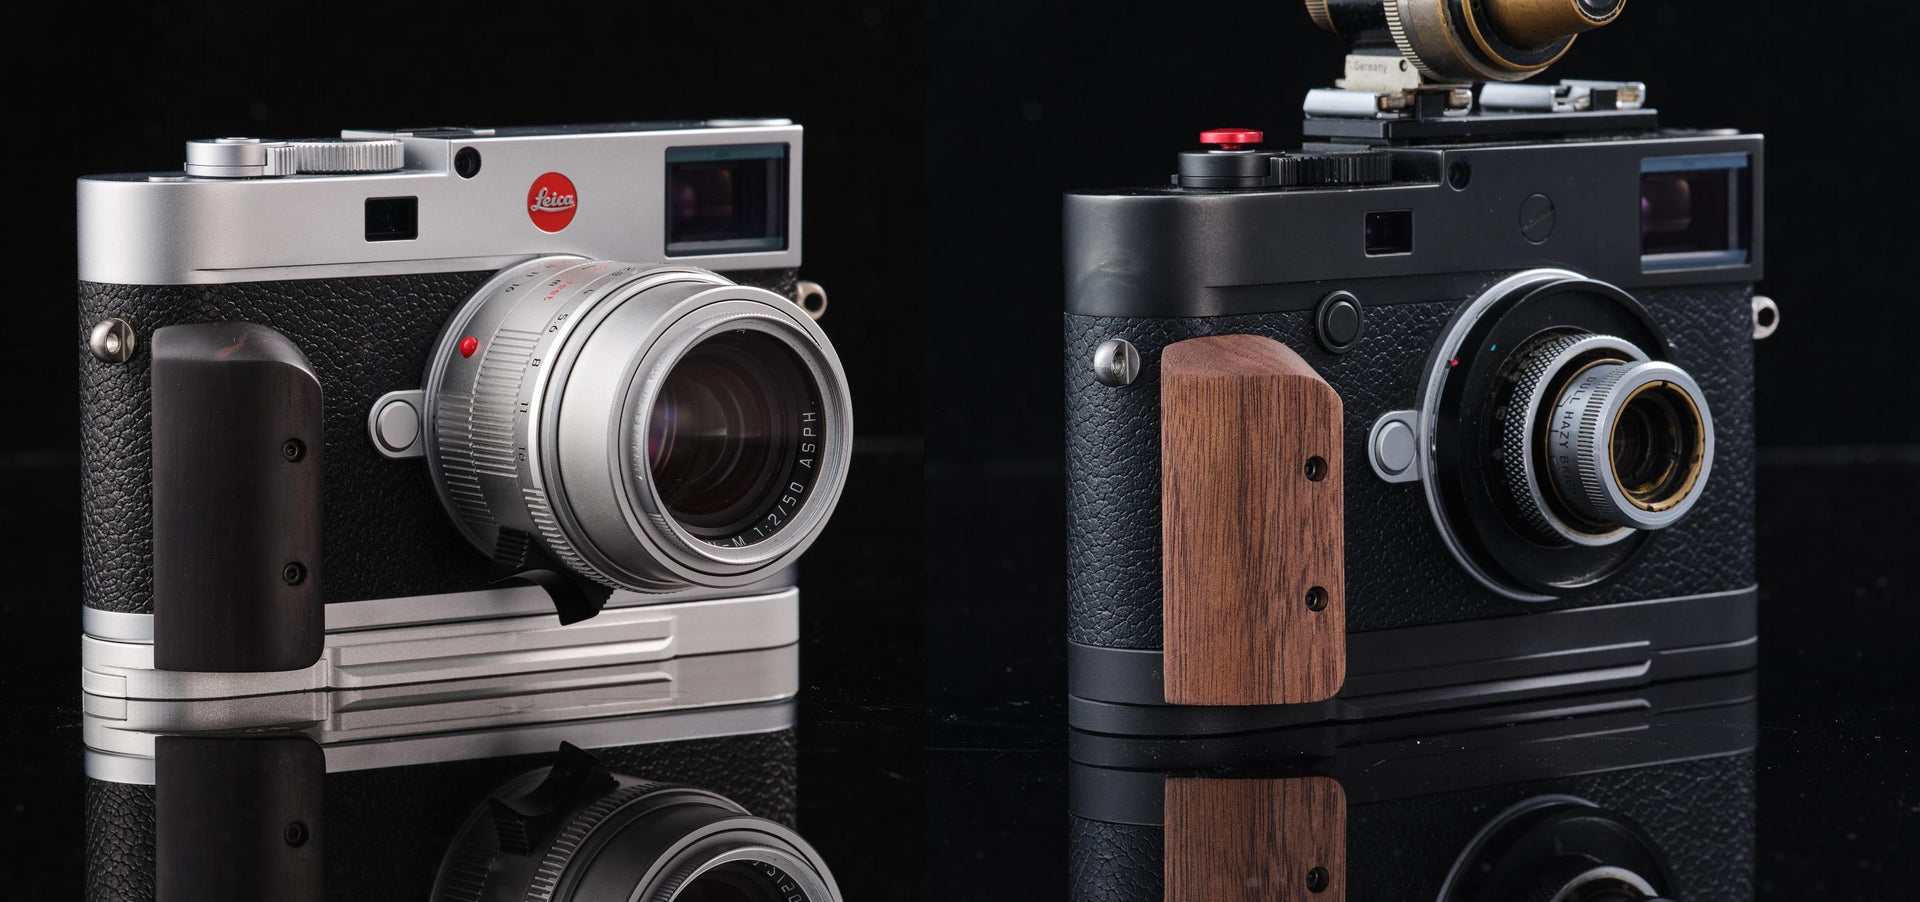 Load video: IDSworks handgrips for your Leica M